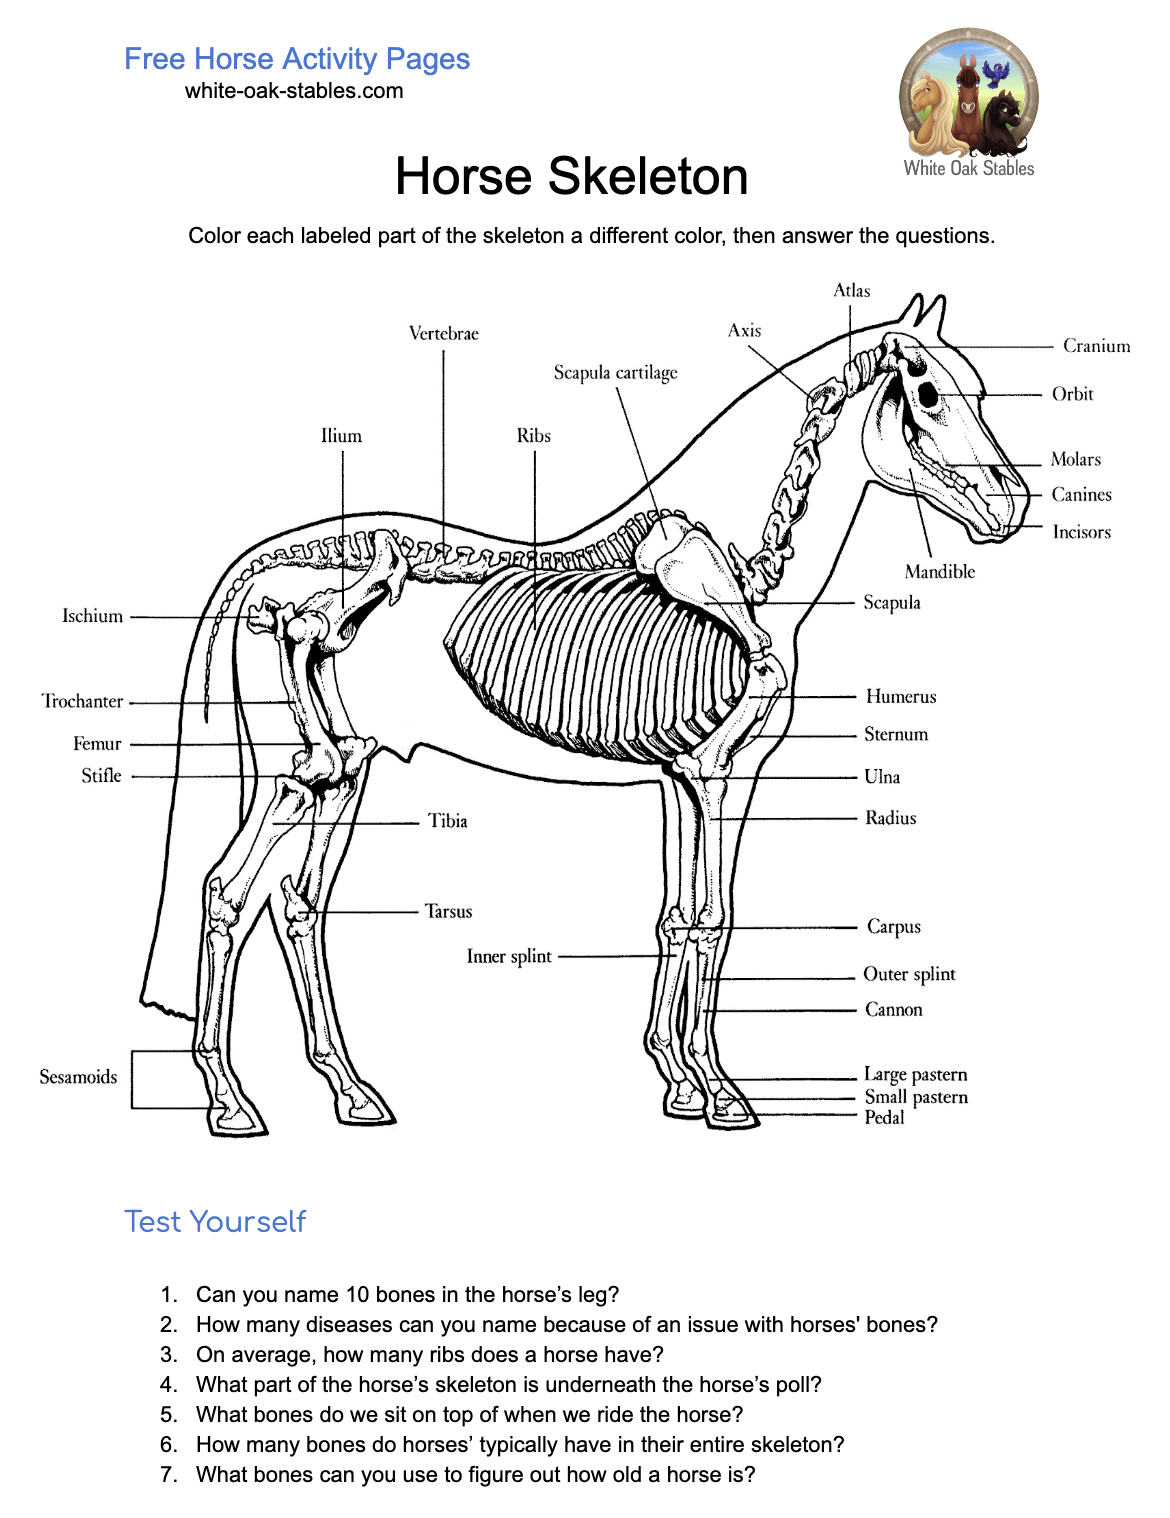 Horse Skeleton Activity Pages